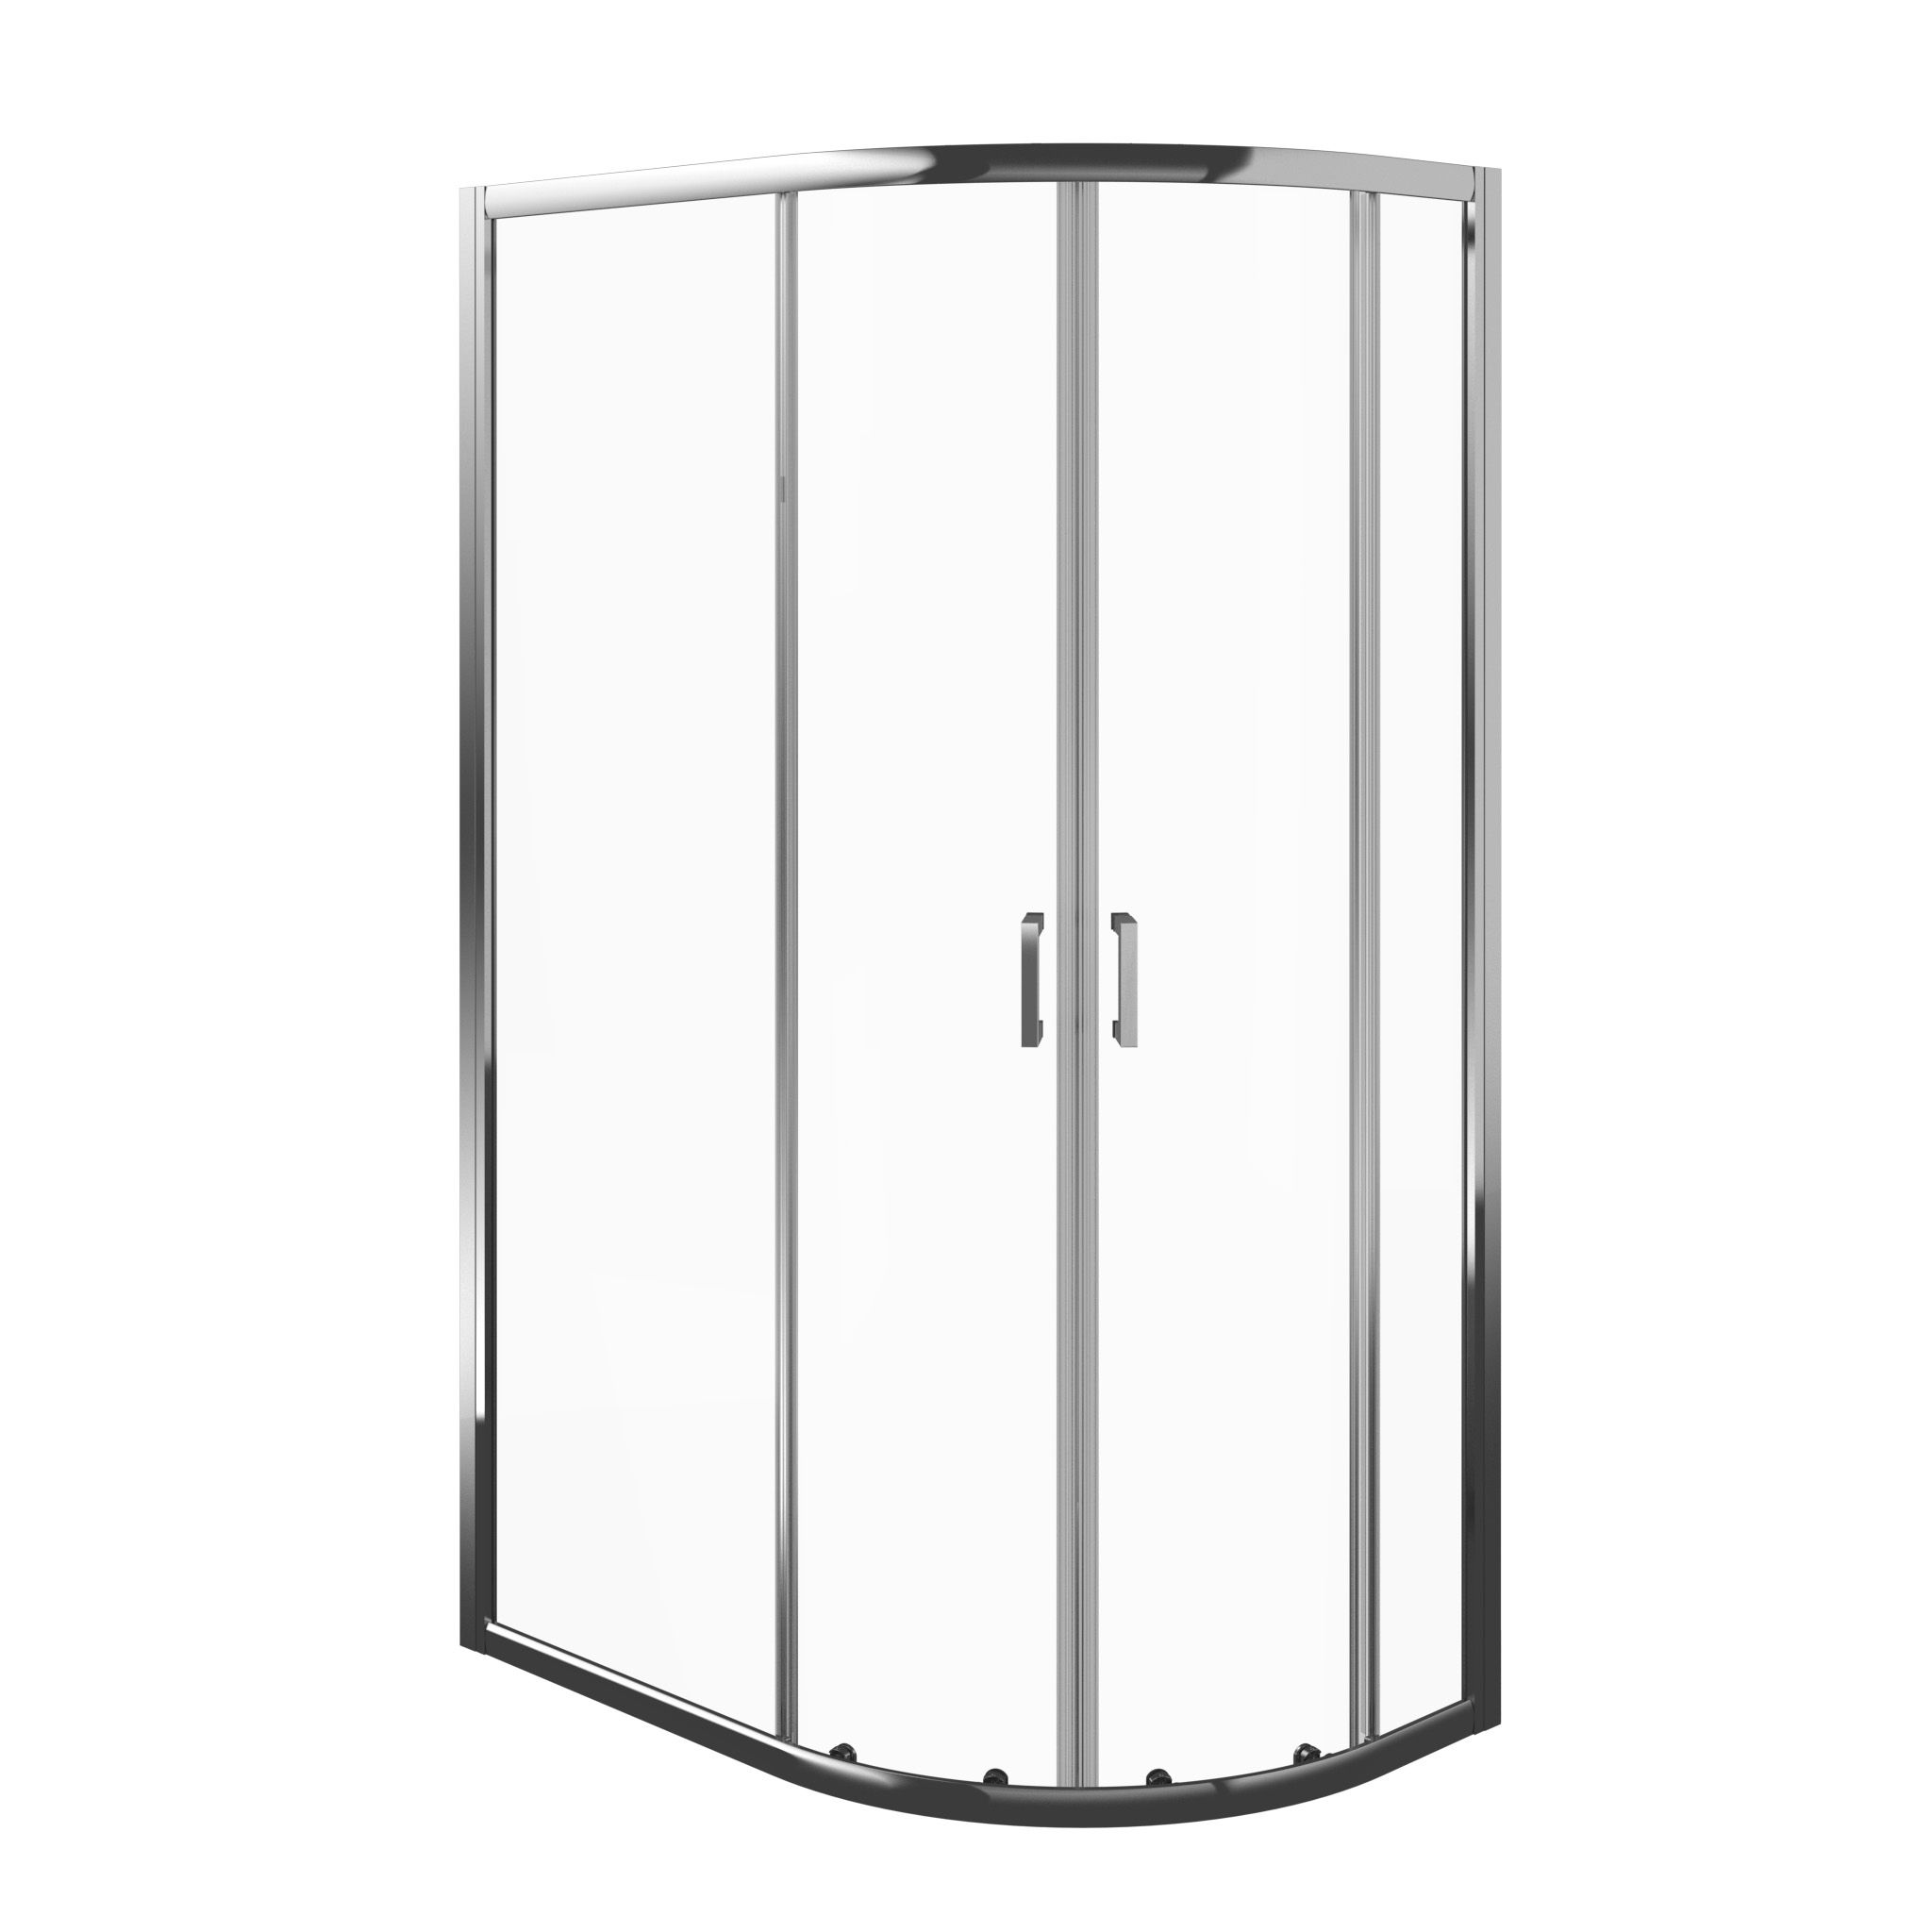 Edge 8 Silver effect Right-handed Offset quadrant Shower Enclosure & tray with Double sliding doors (H)200cm (W)120cm (D)80cm